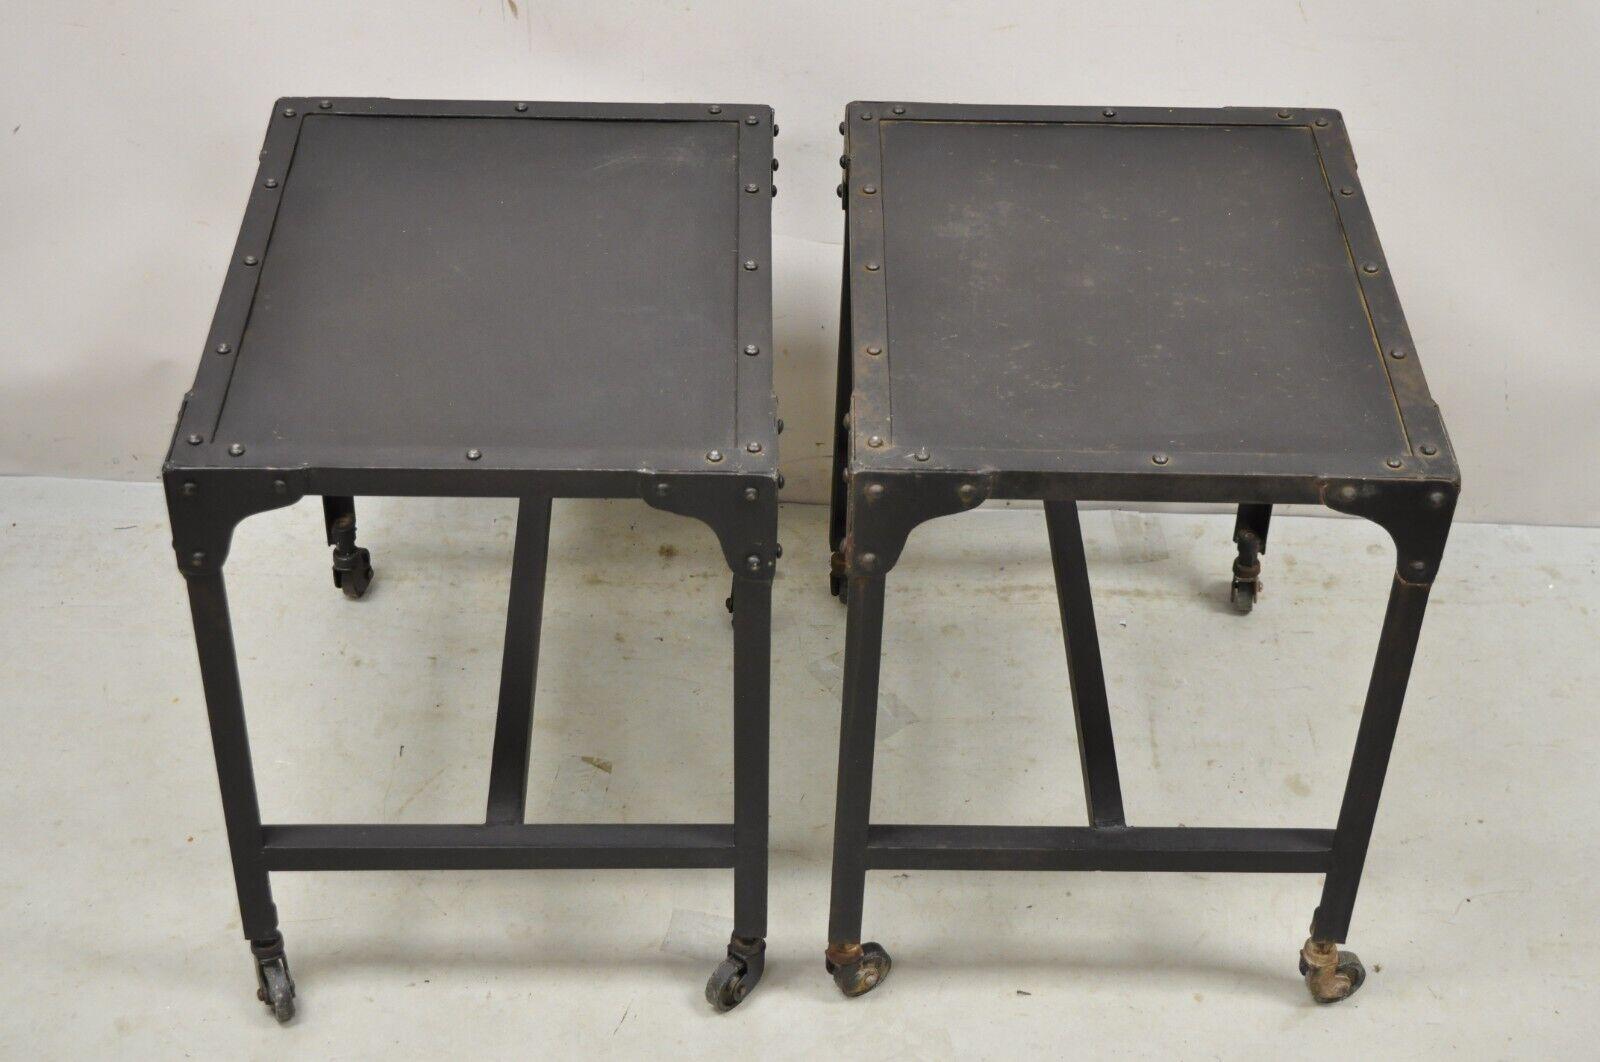 Decorator Industrial Vintage Style Steel Metal Side Tables on Wheels, a Pair For Sale 7